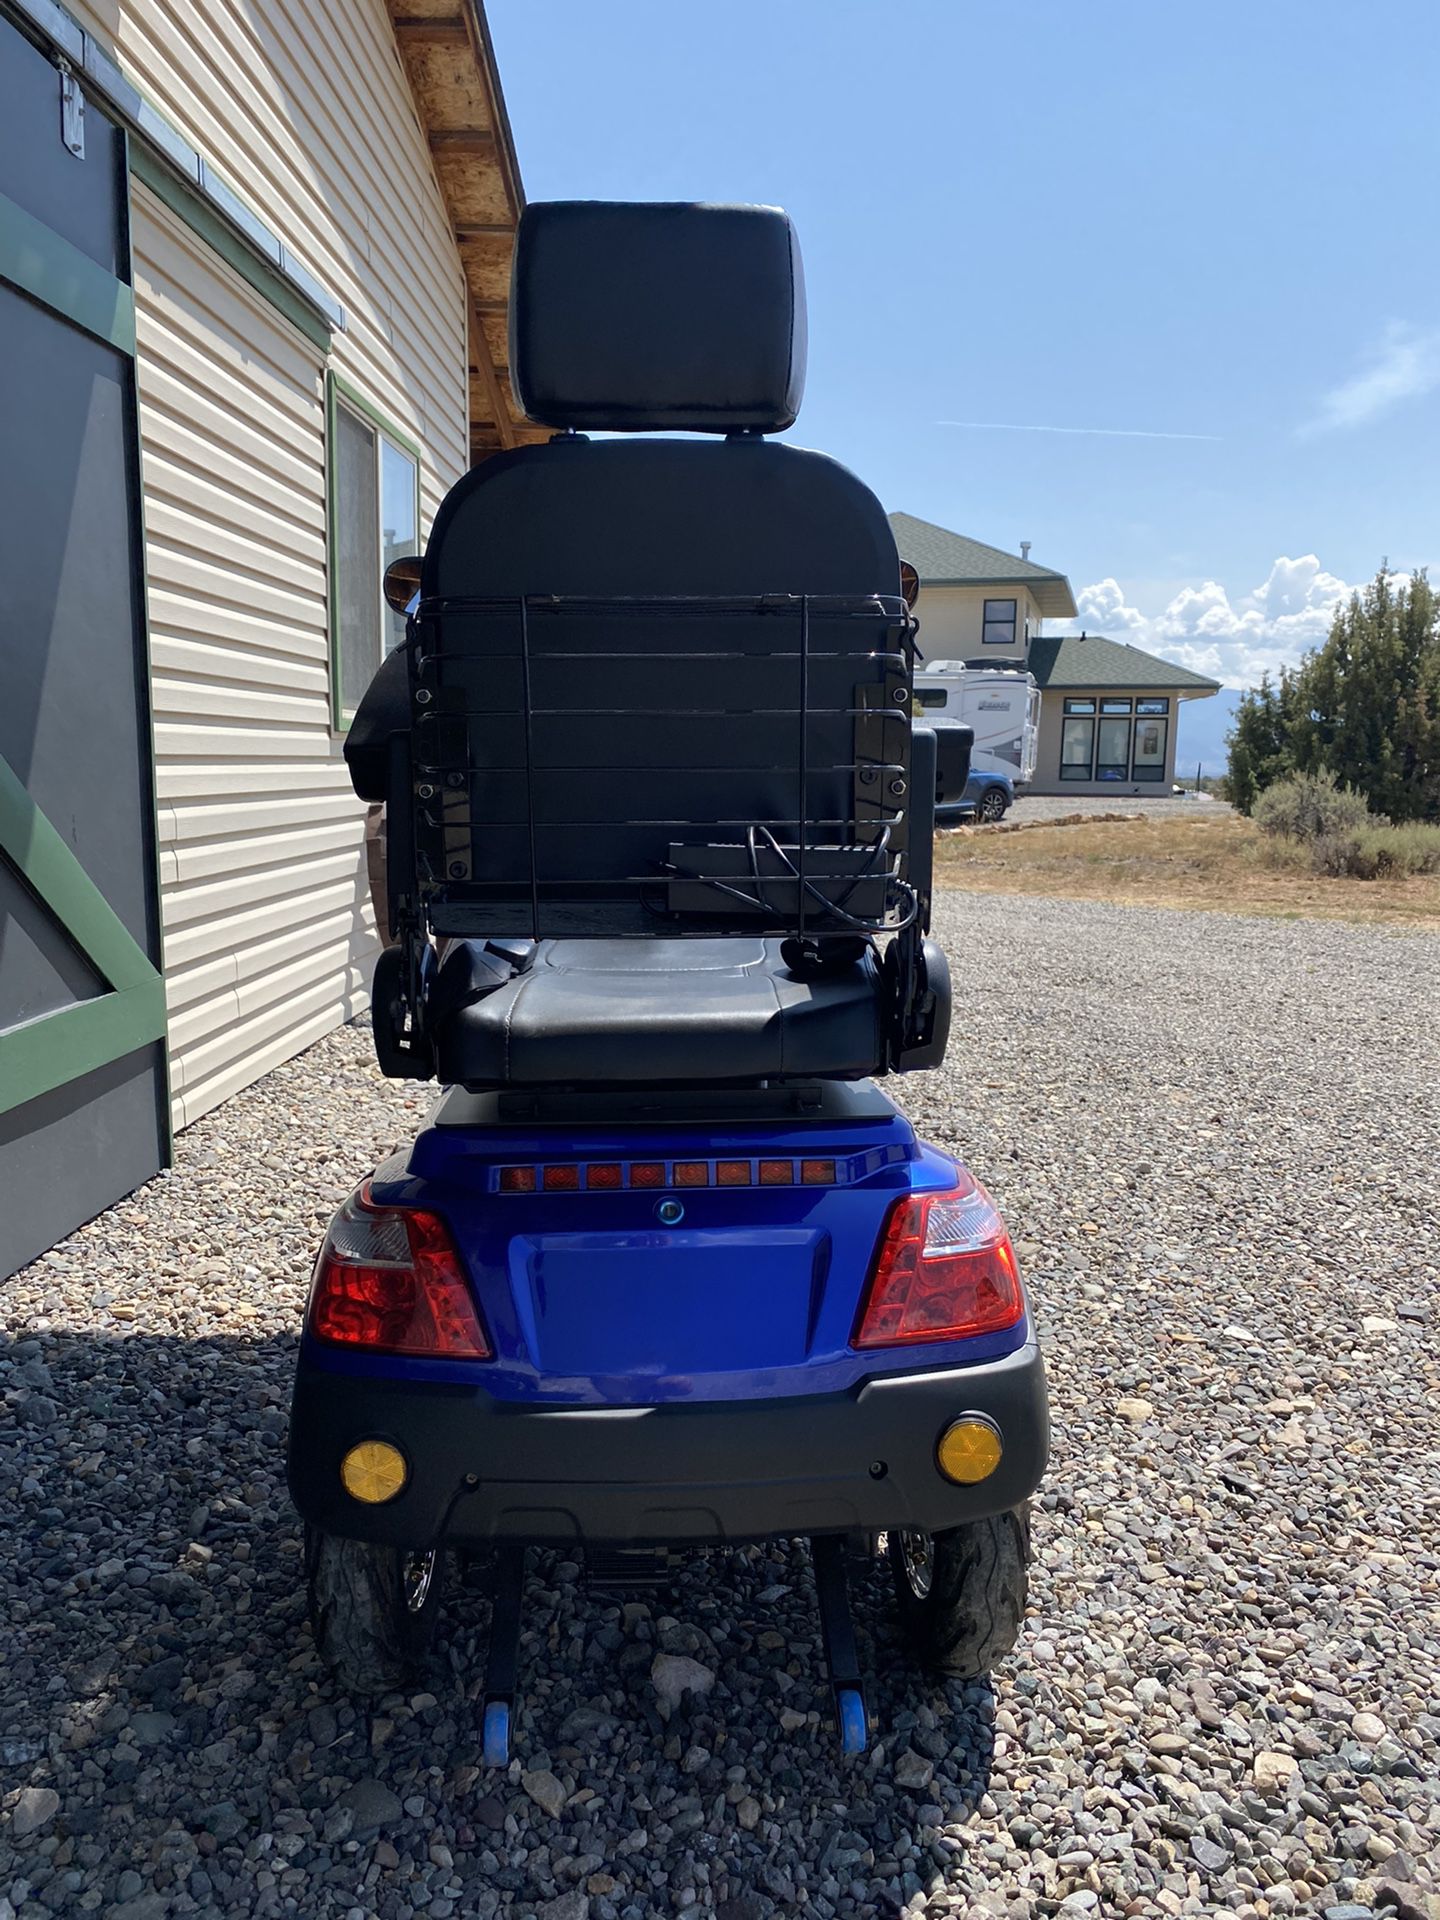 4 Wheel Mobility Scooter